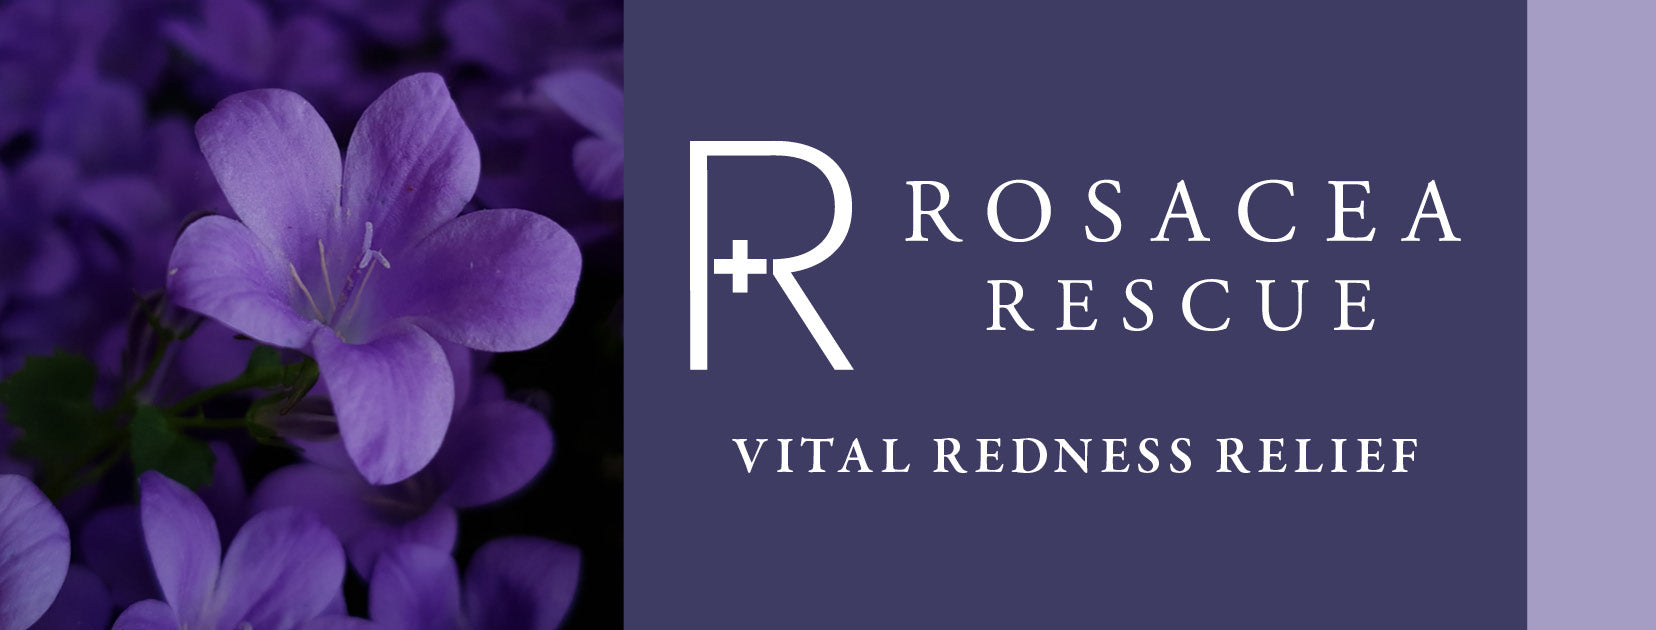 Rosacea Rescue - Systems/Collections